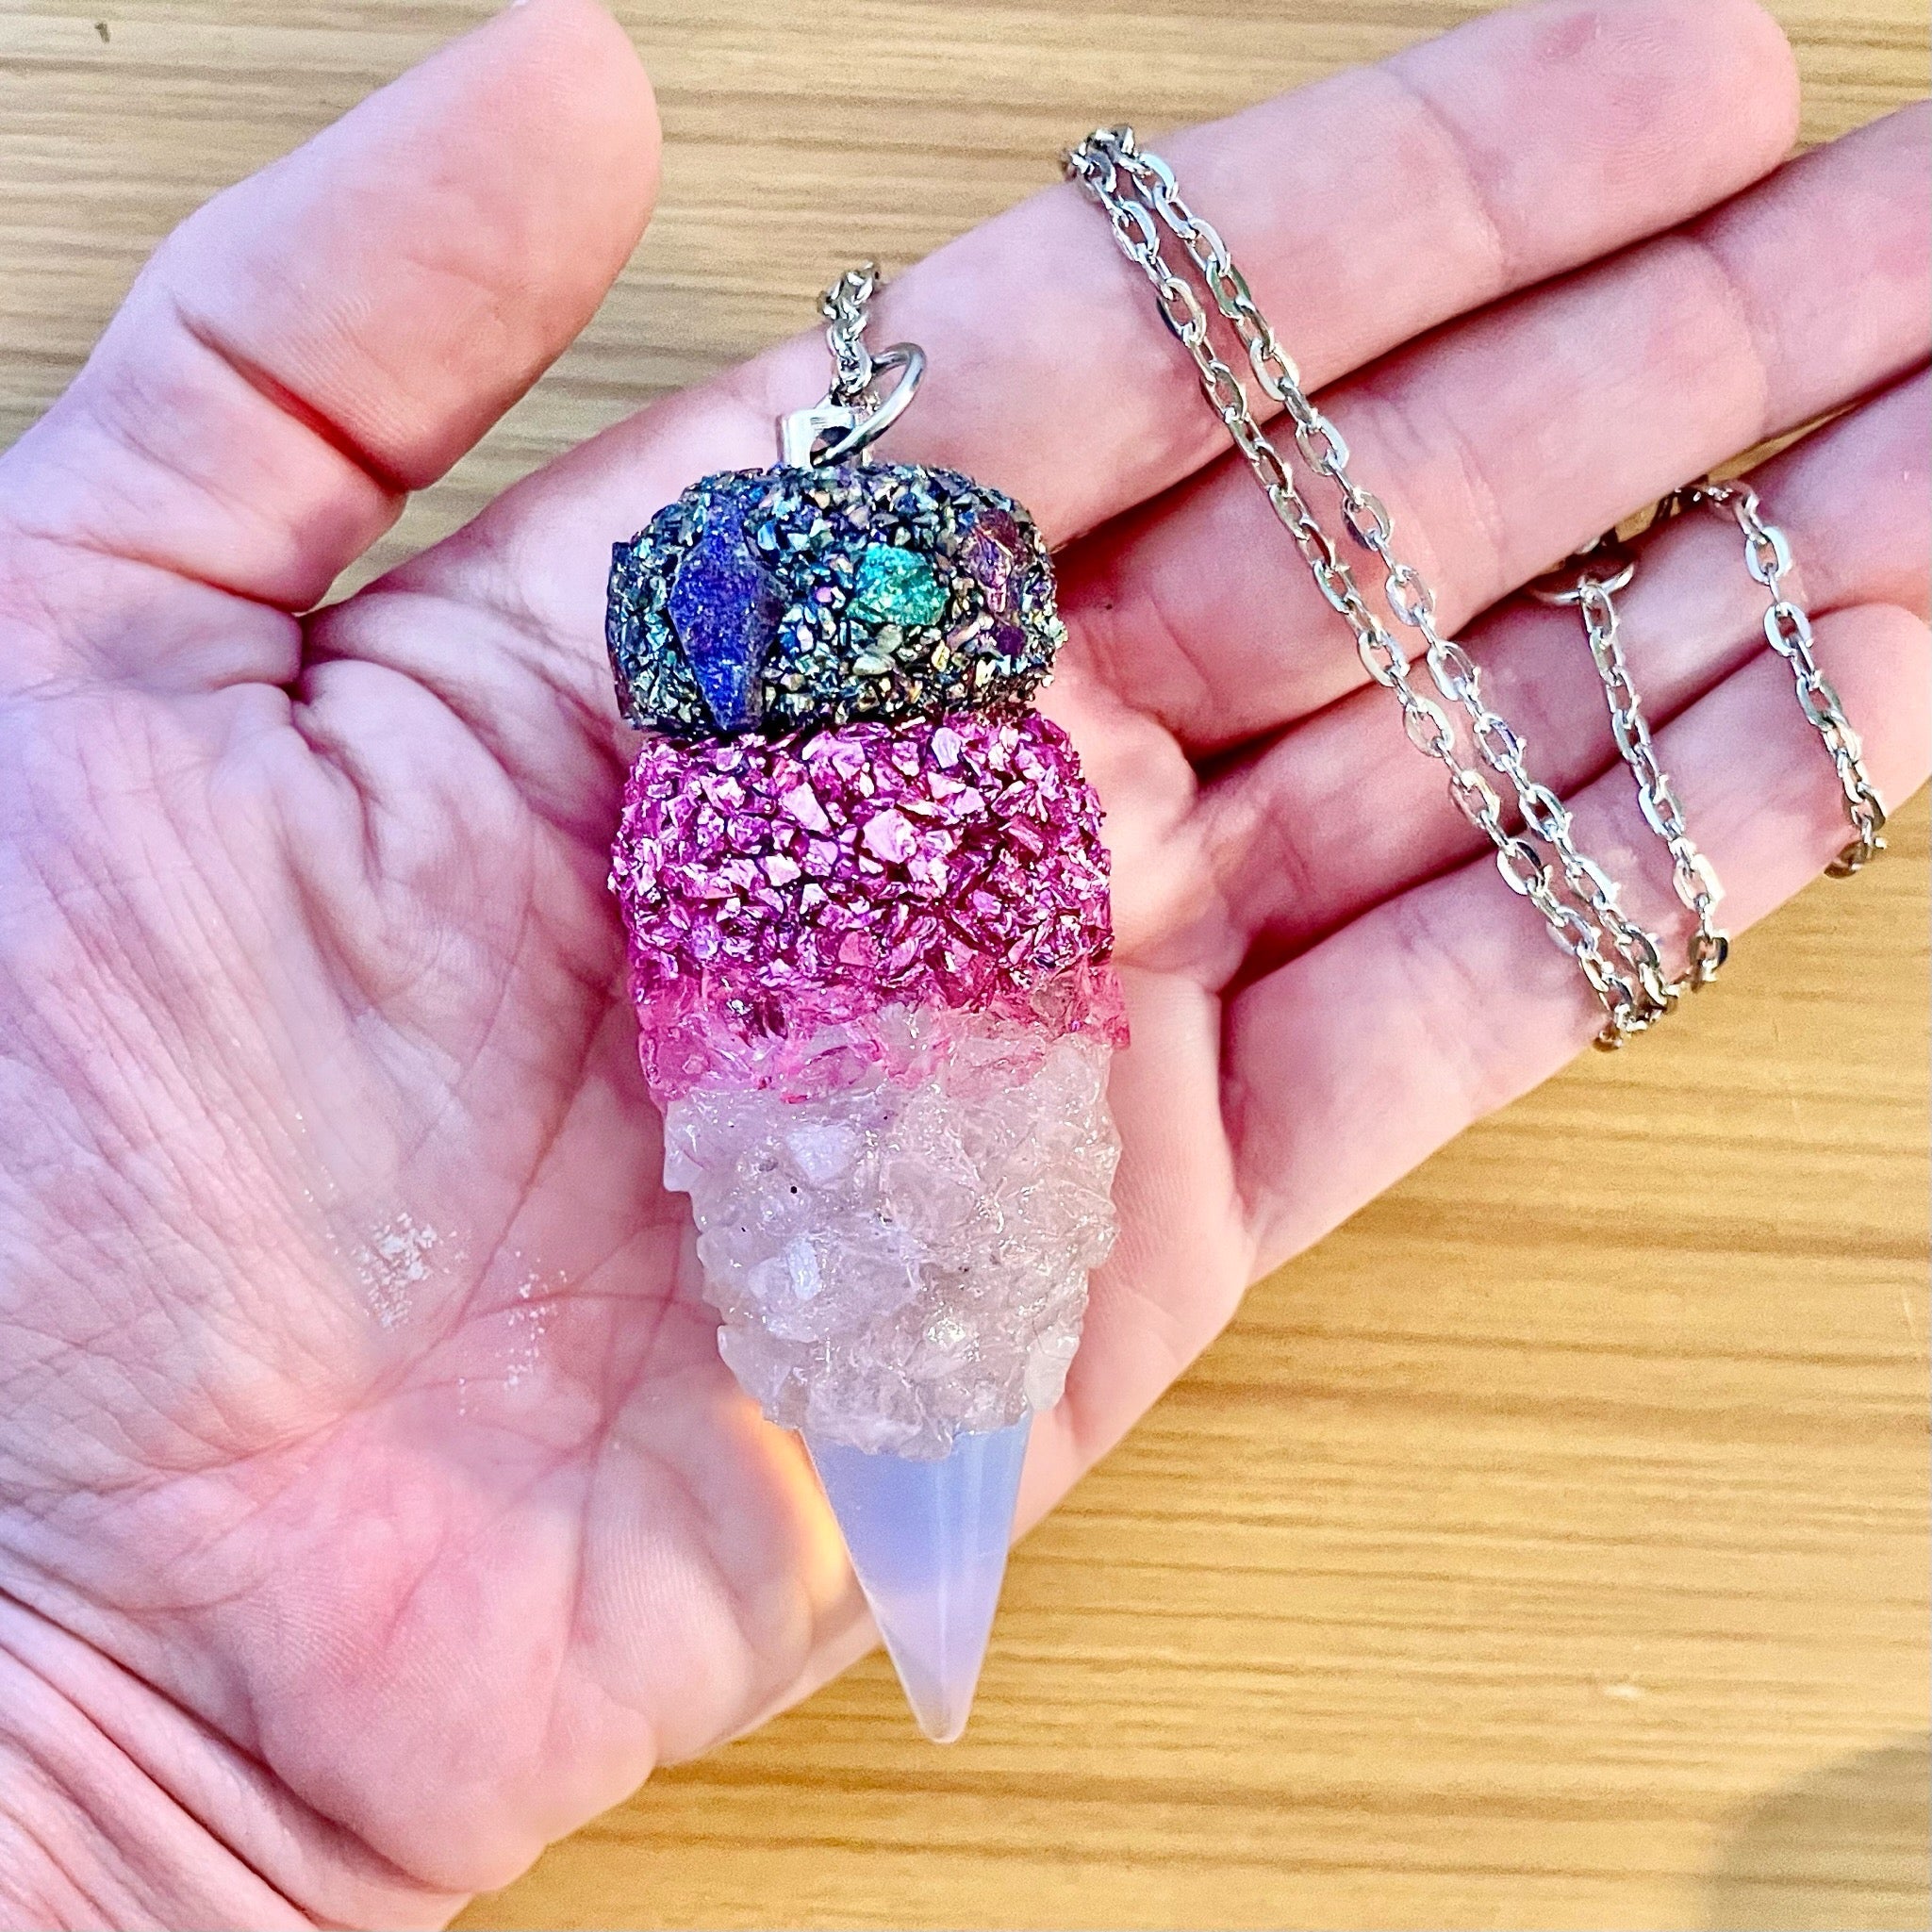 Crystal Stash Necklace with Spoon